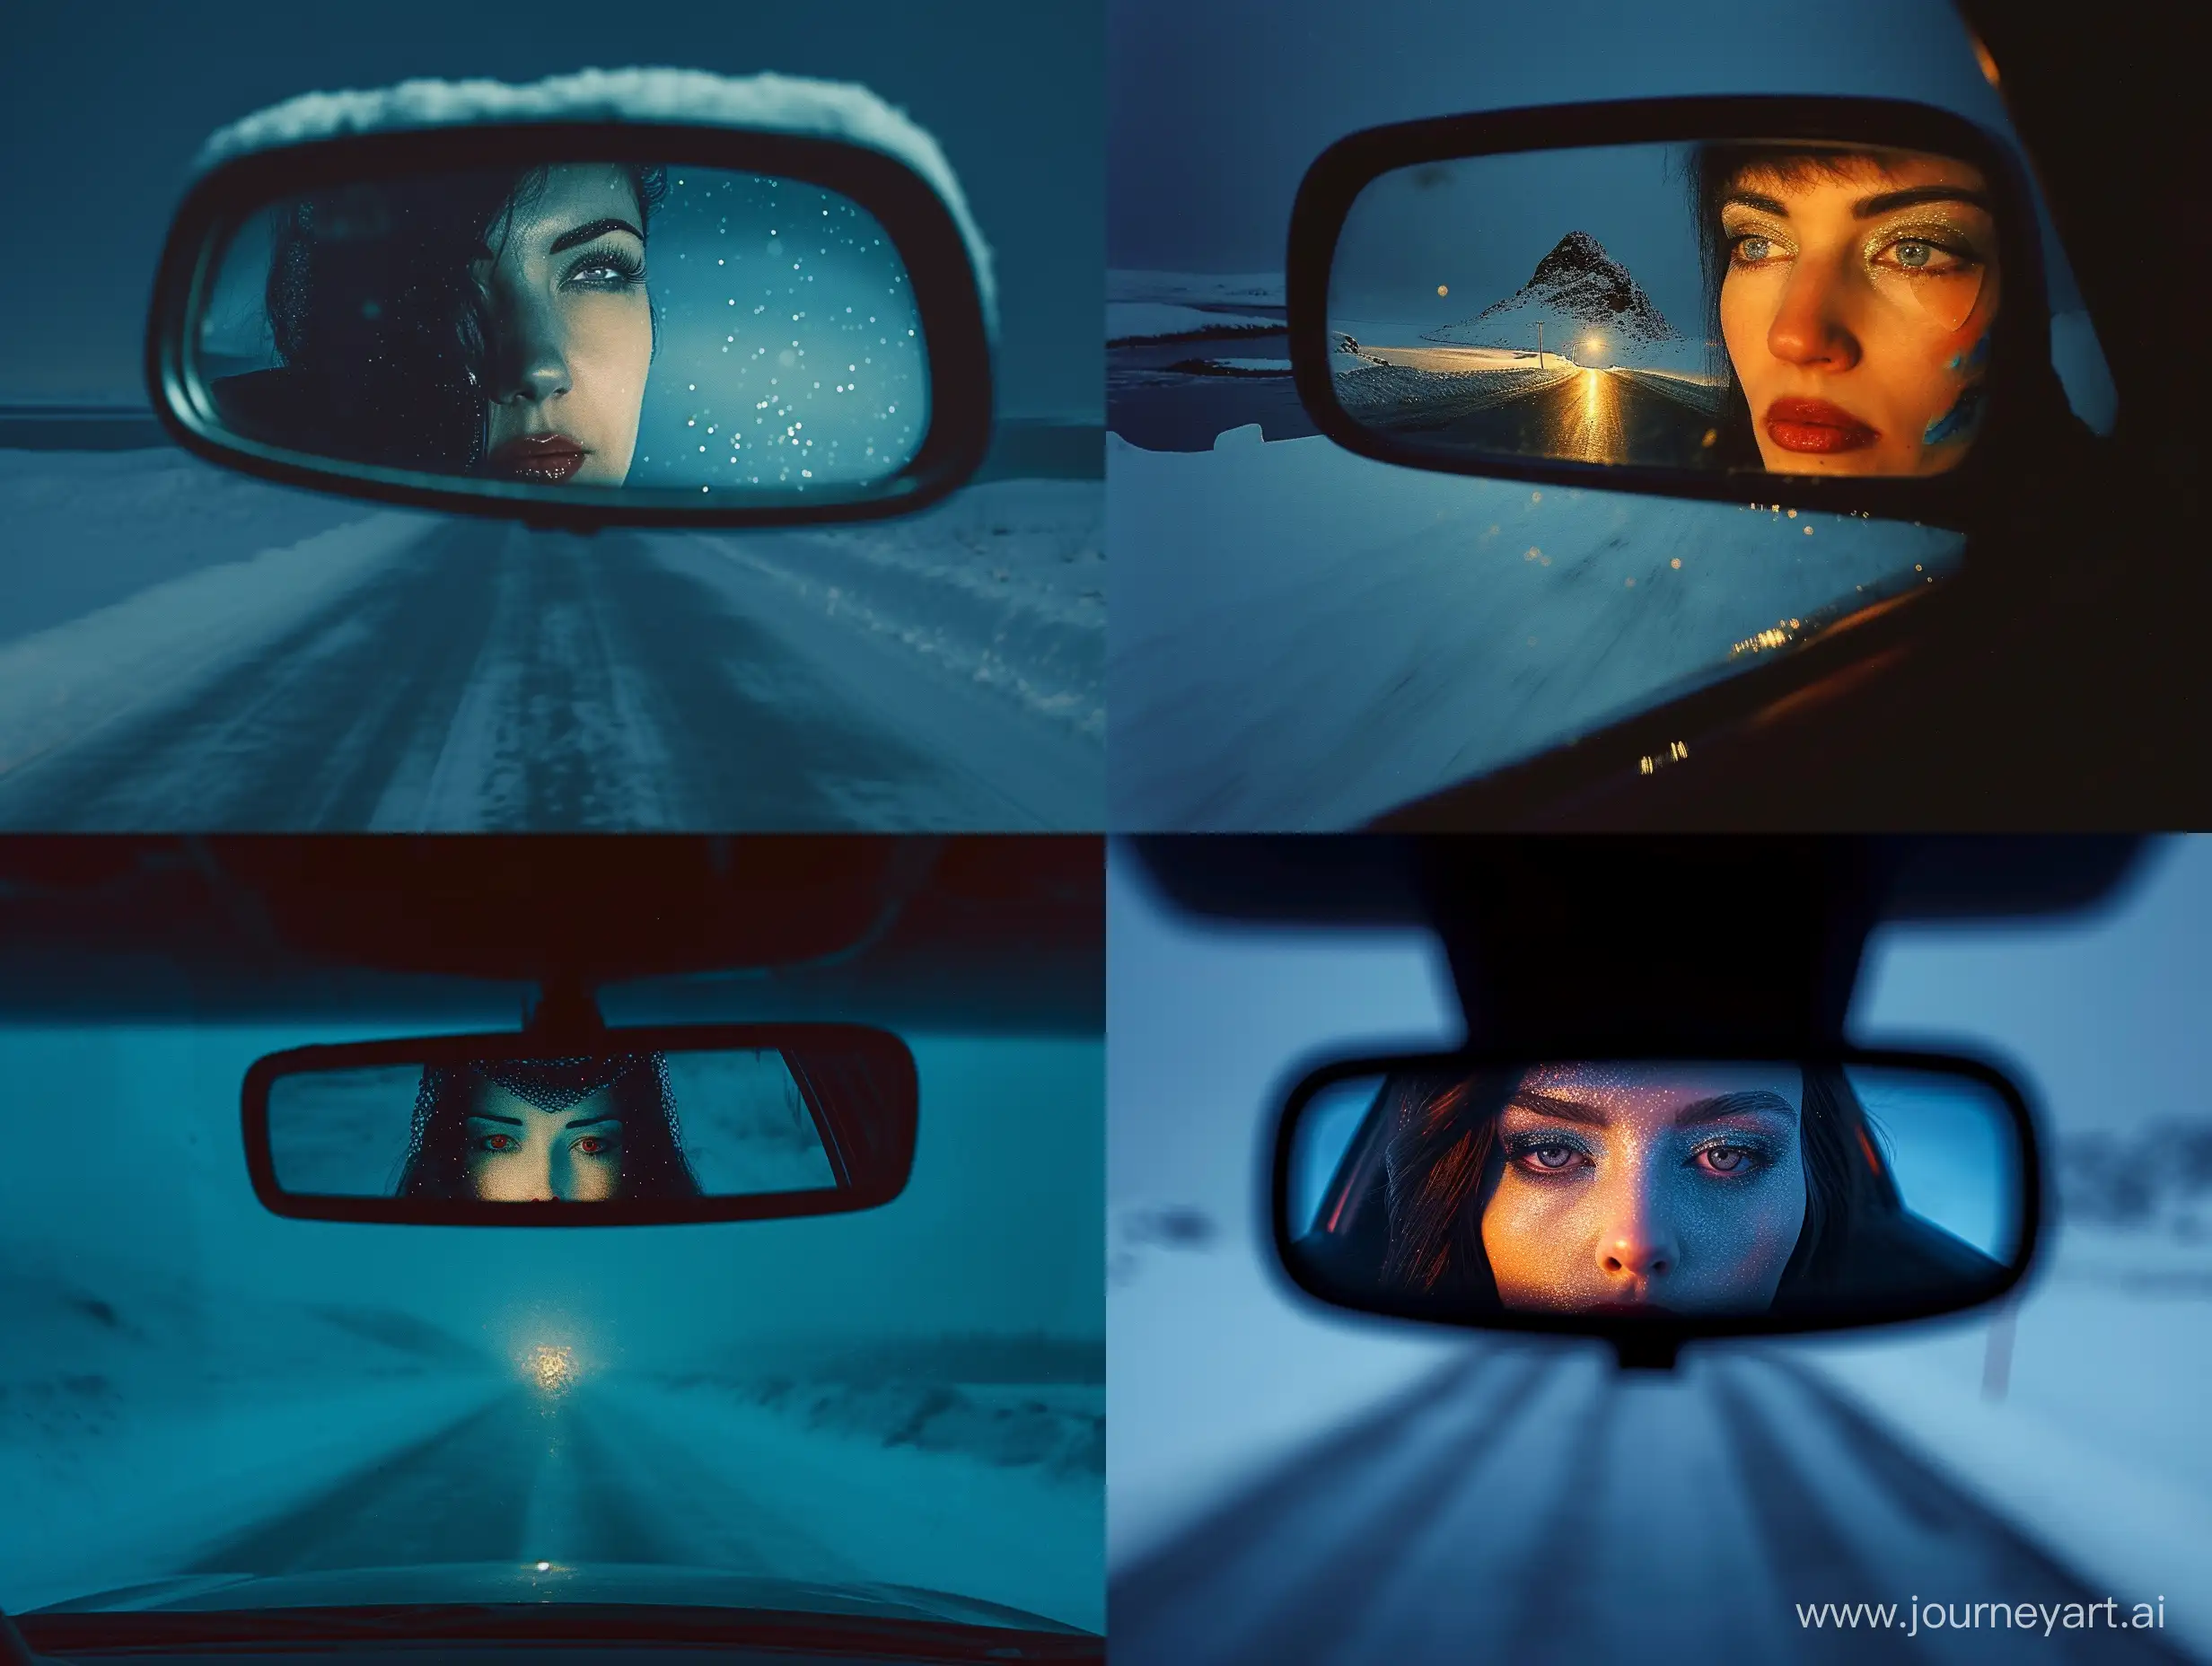 cinematic stills minimalist film amazing dali painting mirror optical illusion island endless night road snowy car driver POv a woman perfect face in the rear view mirror